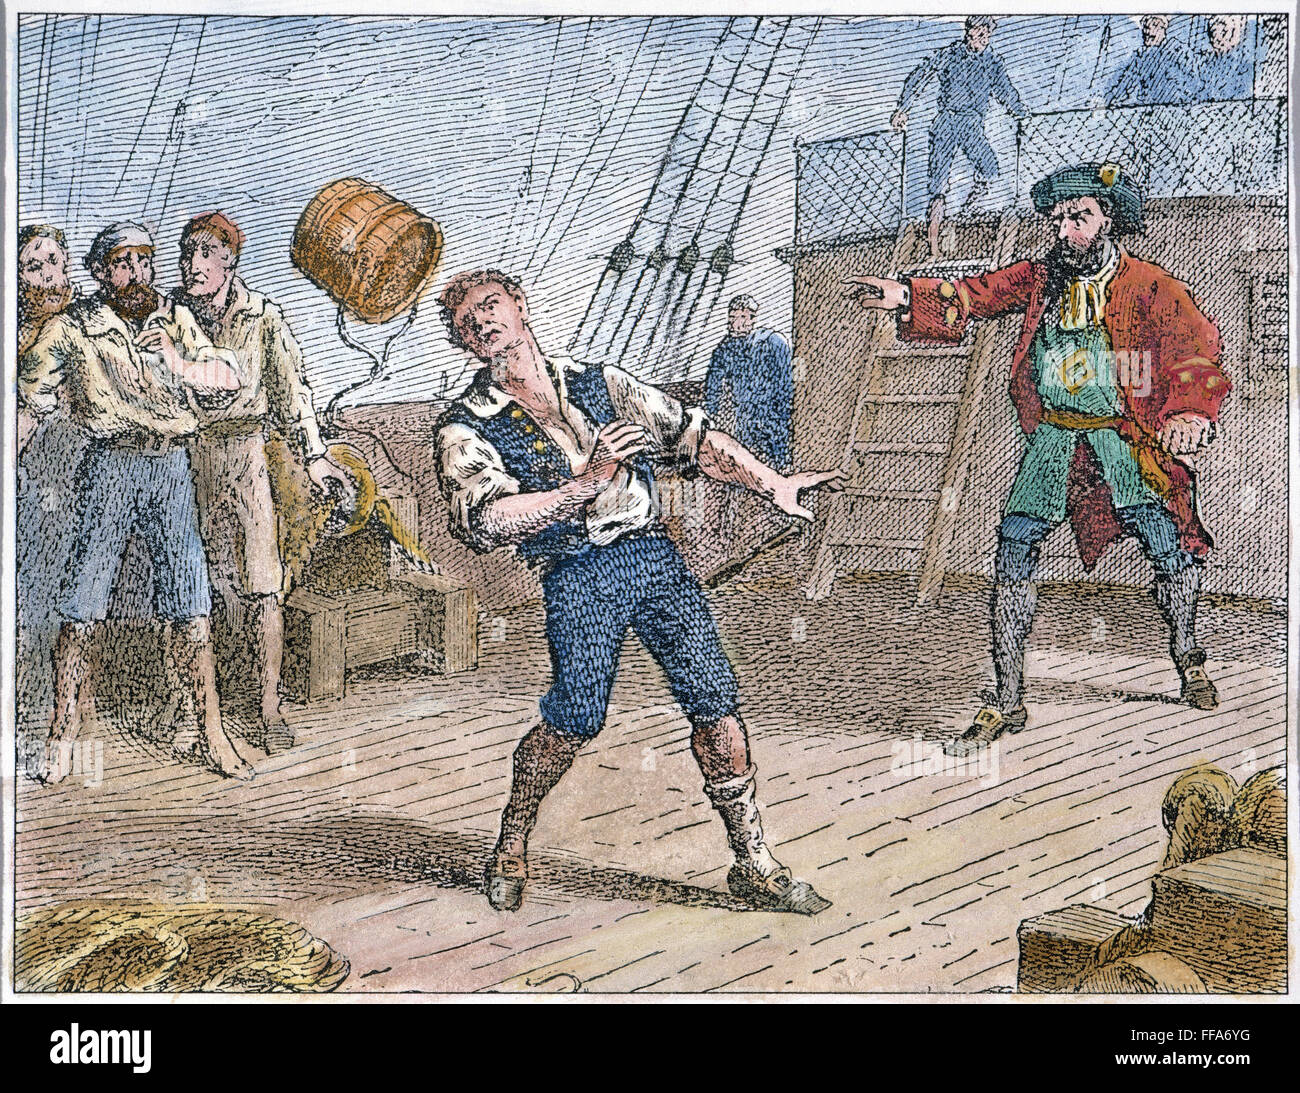 CAPTAIN WILLIAM KIDD /n(c1645-1701). Scottish privateer and pirate. Captain Kidd hurls a bucket and mortally wounds his mutinous gunner, William Moore, as they cruise off the coast of India in 1697. Line engraving, 19th century. Stock Photo